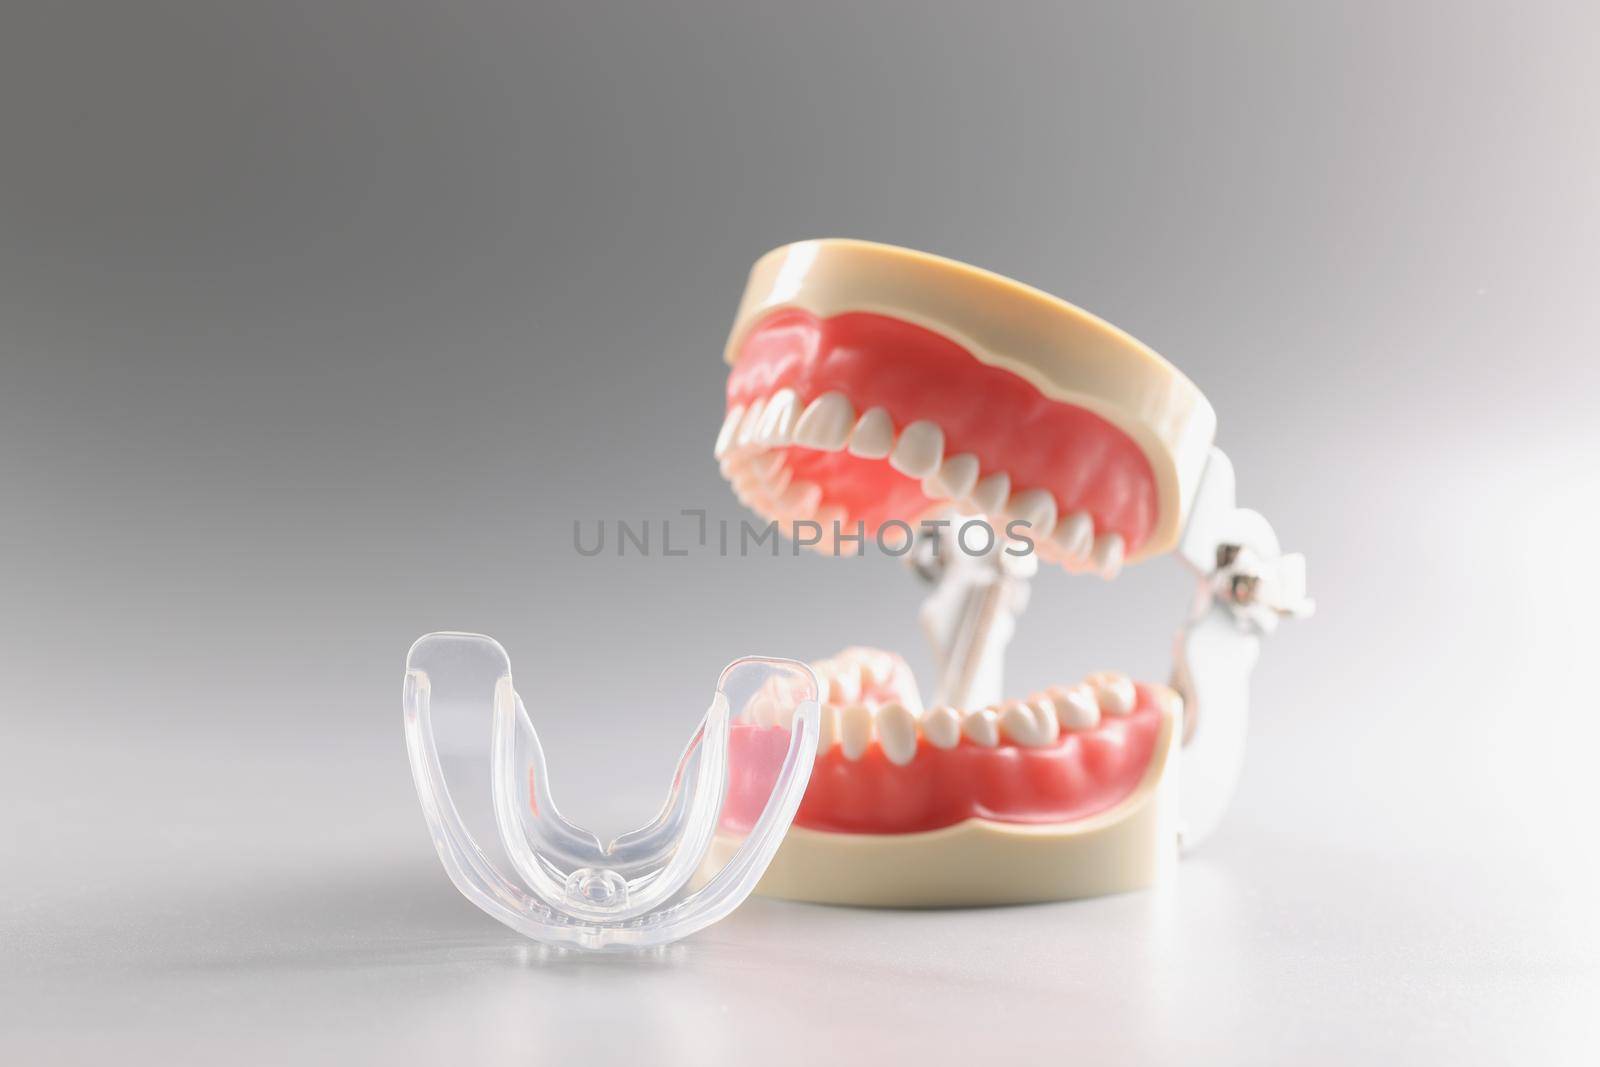 Close-up of human tooth model, teeth orthodontic dental model or human jaw, mouthpiece. Equipment for correcting bite. Dentistry, stomatology, care concept